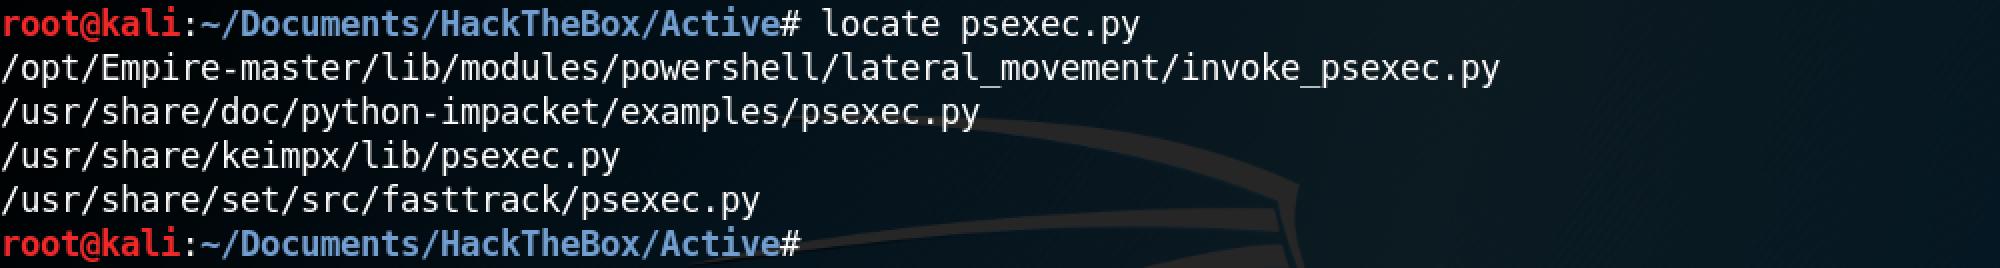 Location of psexec.py on the local filesystem.